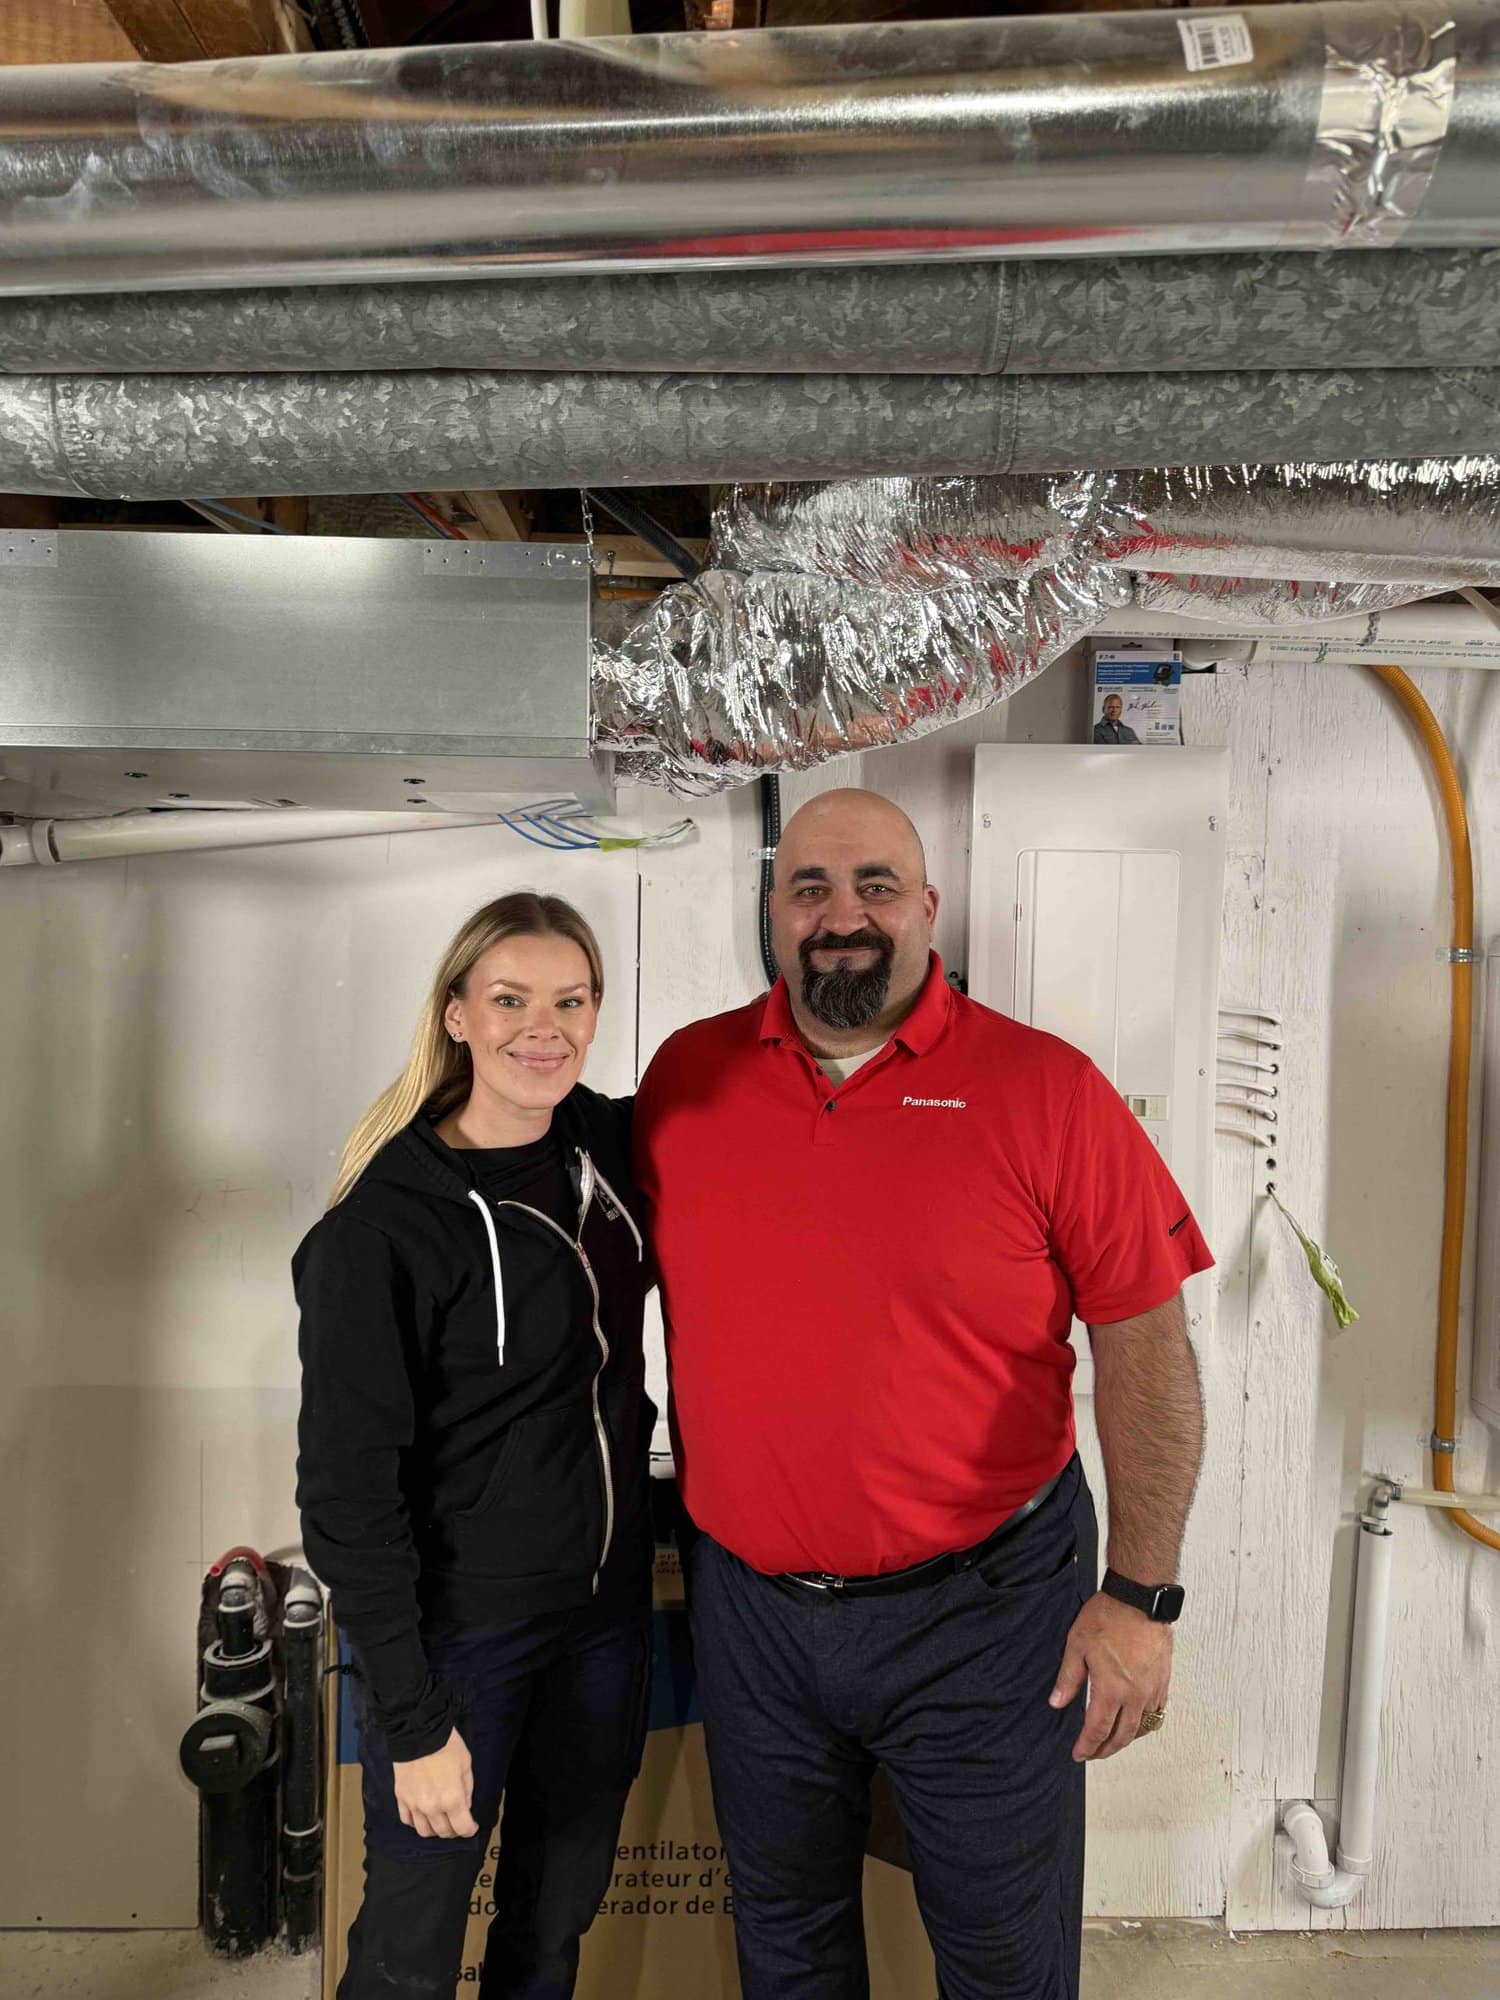 Sherry Holmes with Panasonic Indoor Air Quality expert installing ERV